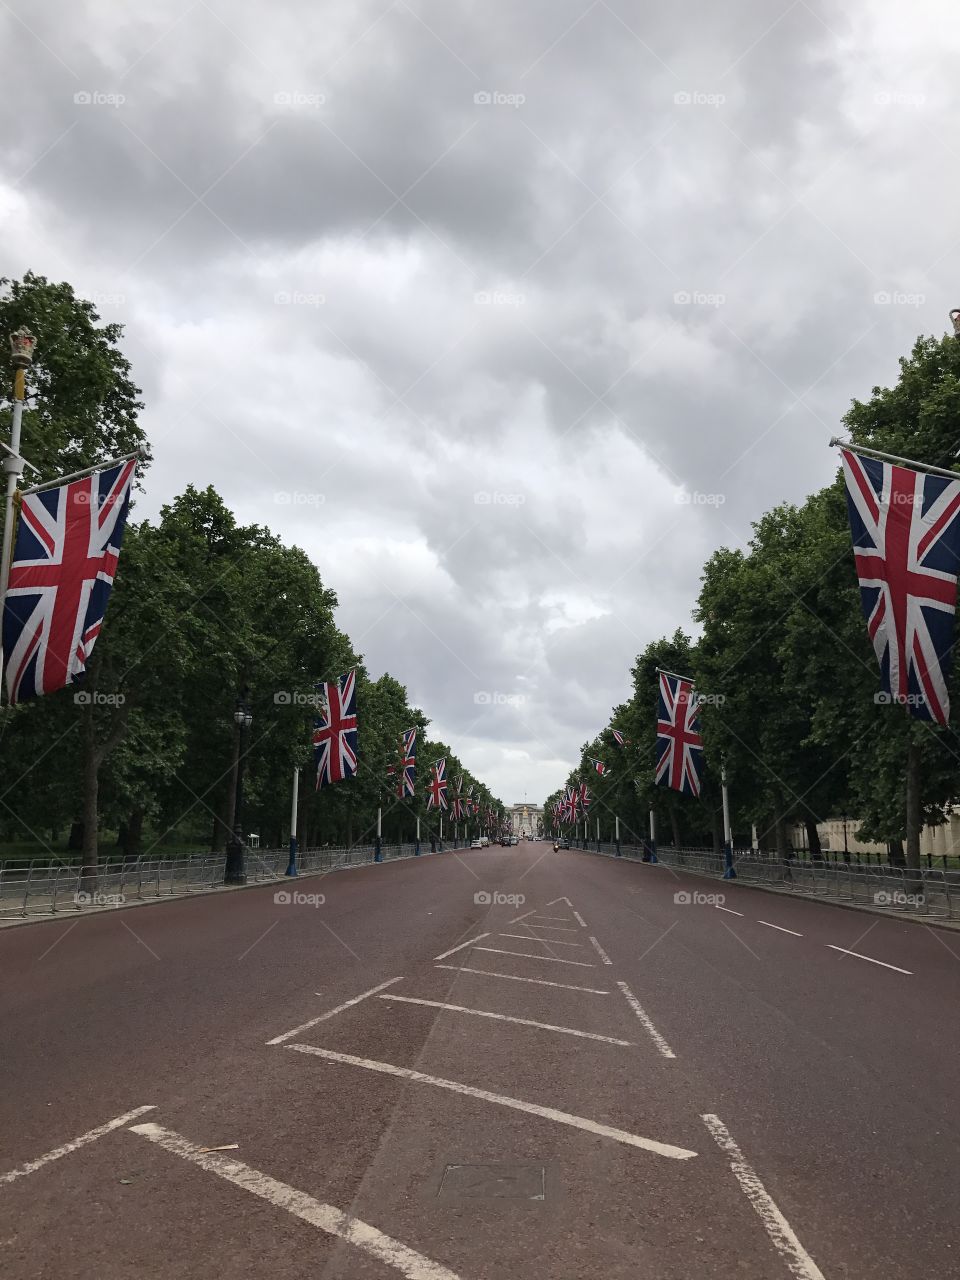 On the road to Buckingham palace. 